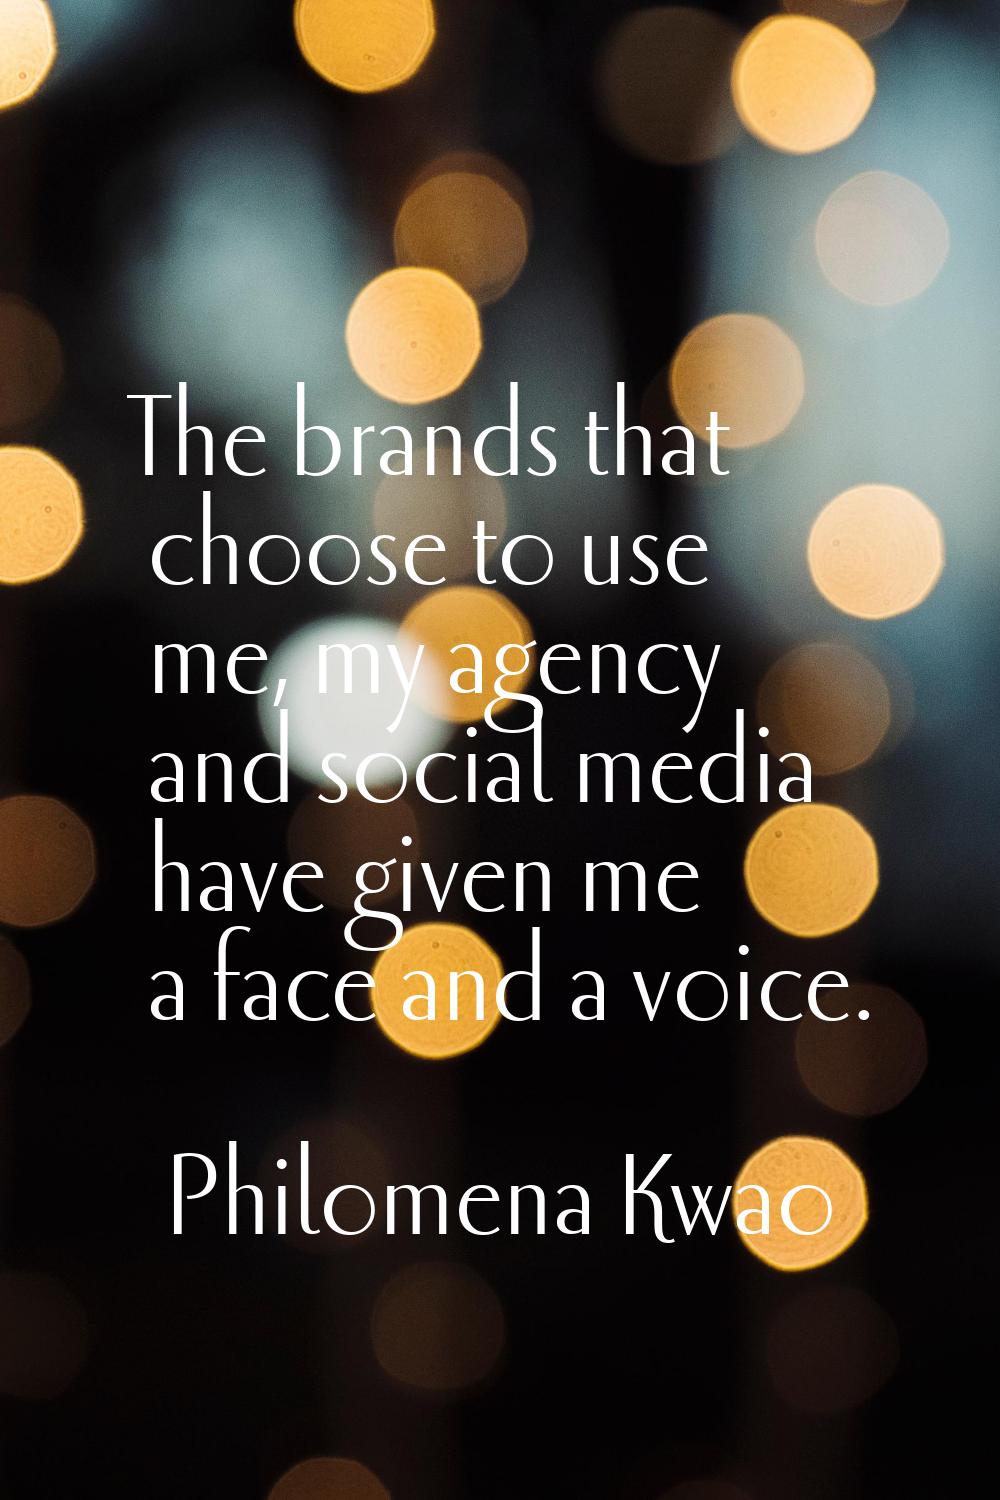 The brands that choose to use me, my agency and social media have given me a face and a voice.